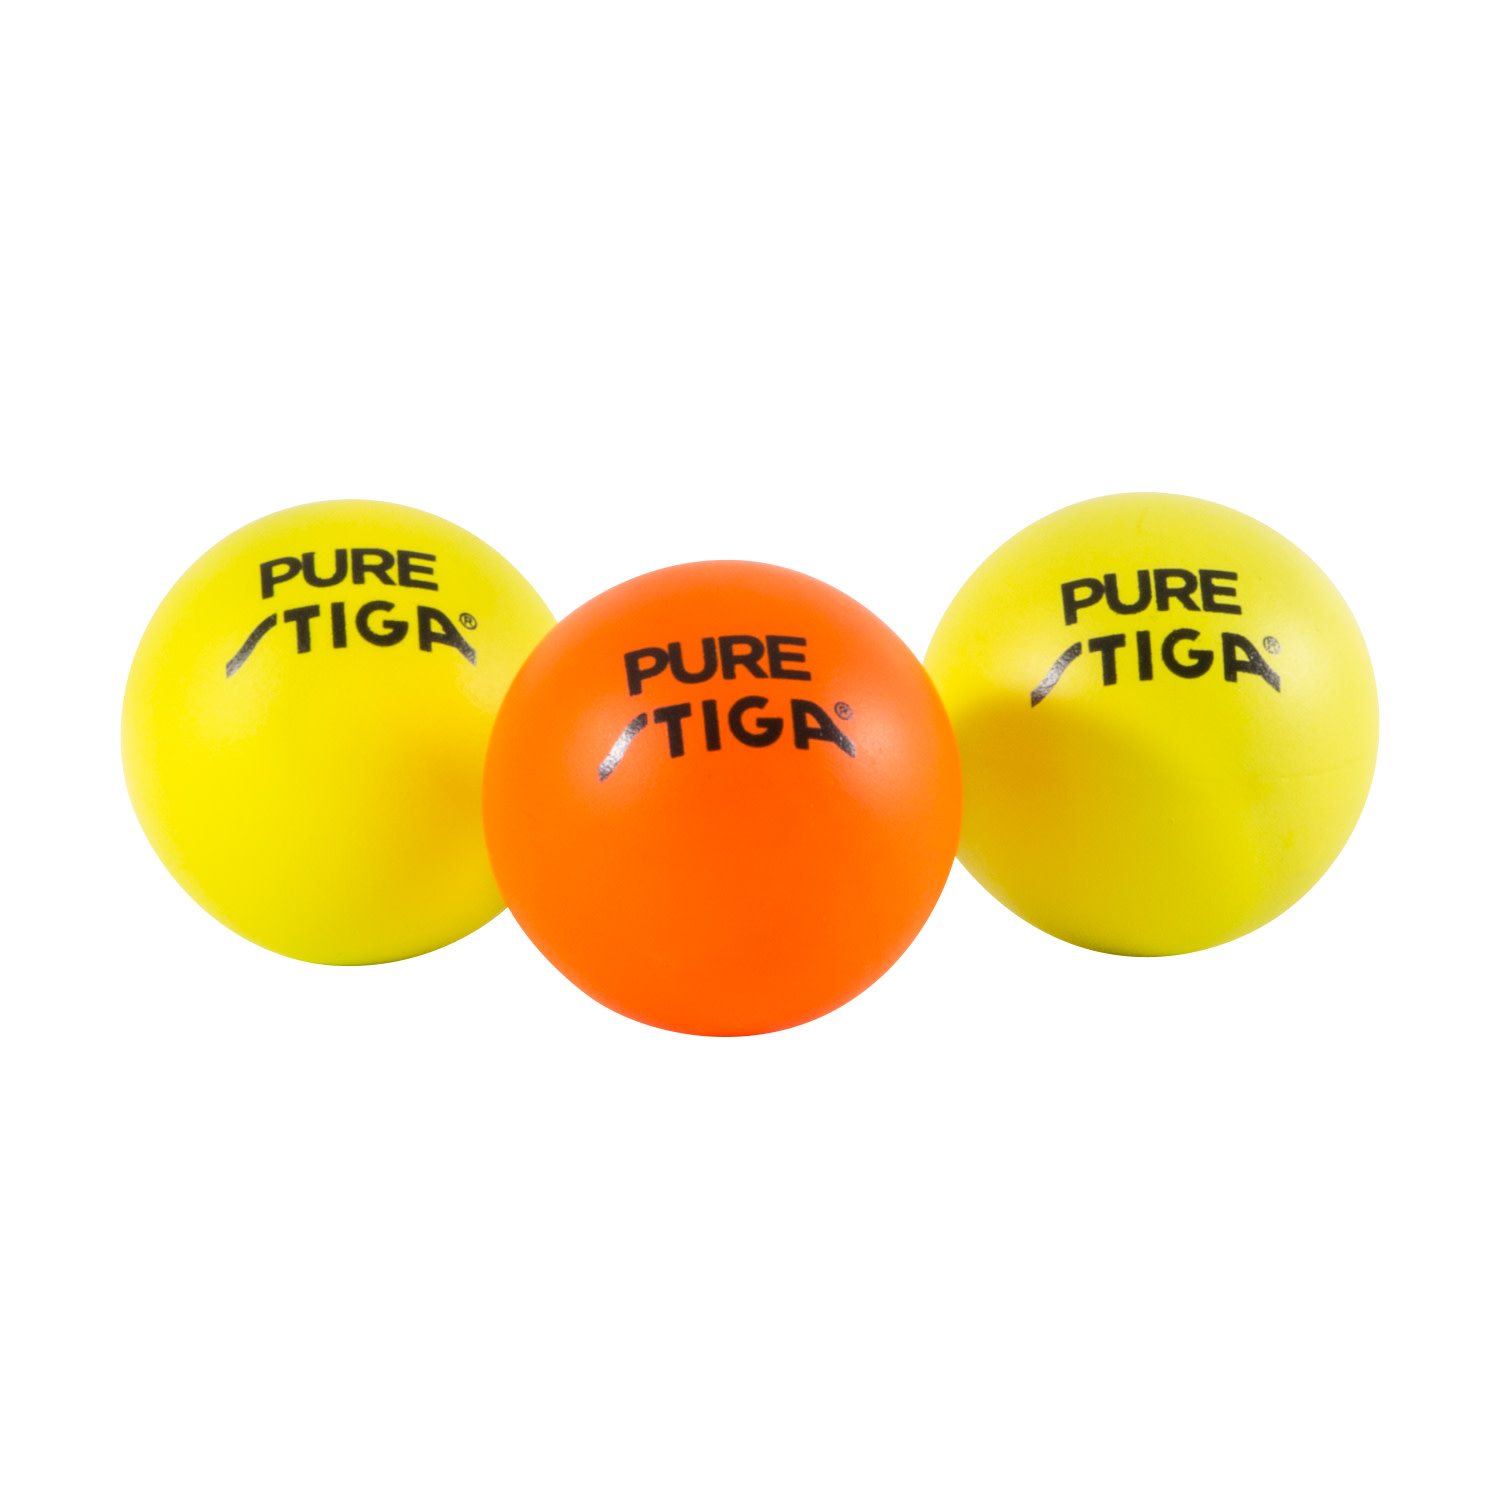 STIGA Pure Color Advance 2-Player Set - Includes Two Rackets and Three Balls - image 5 of 9